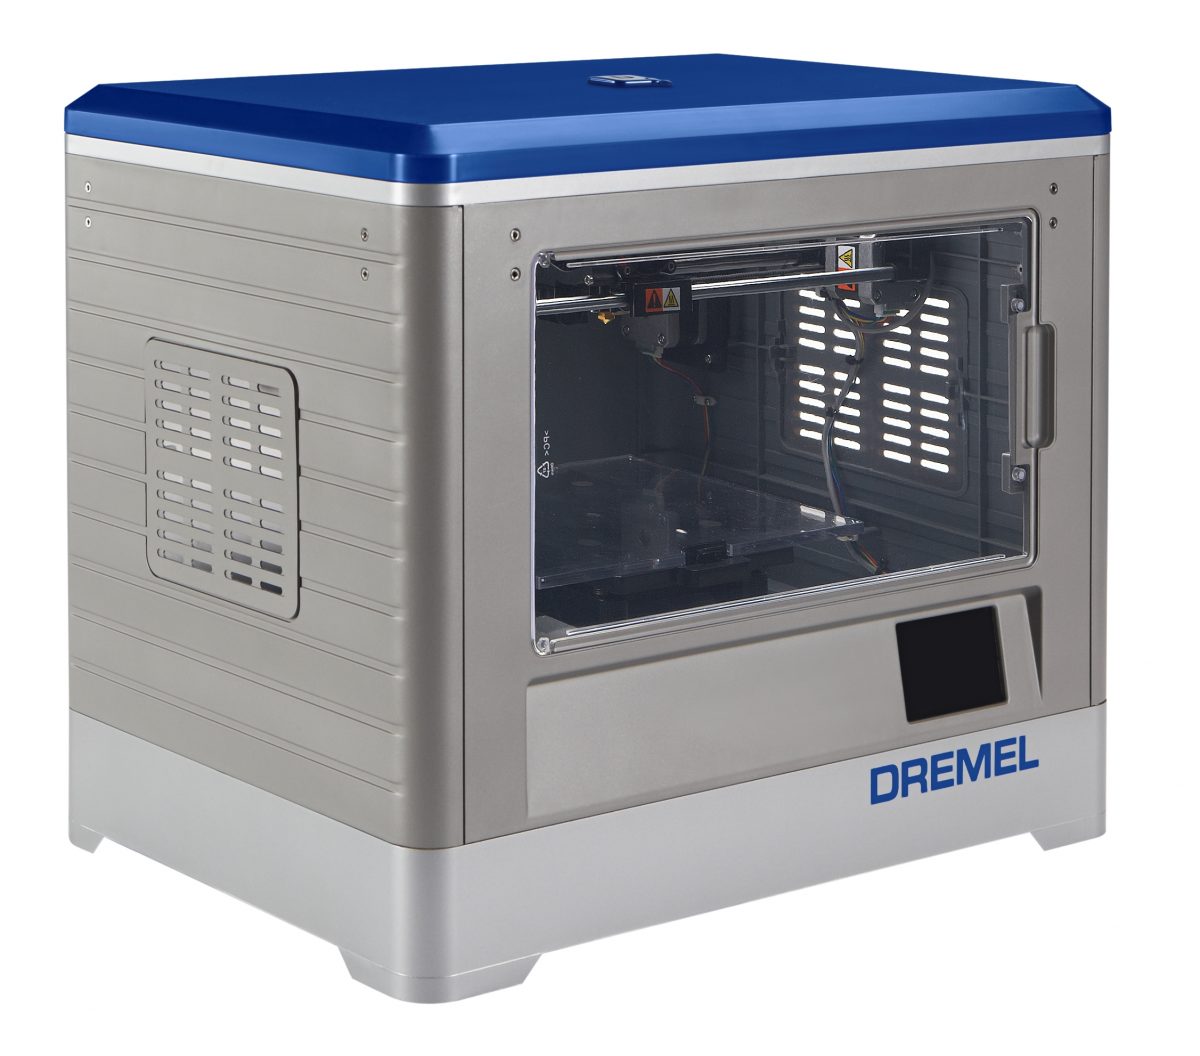 Dremel Has an Affordable 3D Printer; Do You Have One on Your Holiday Wish List?